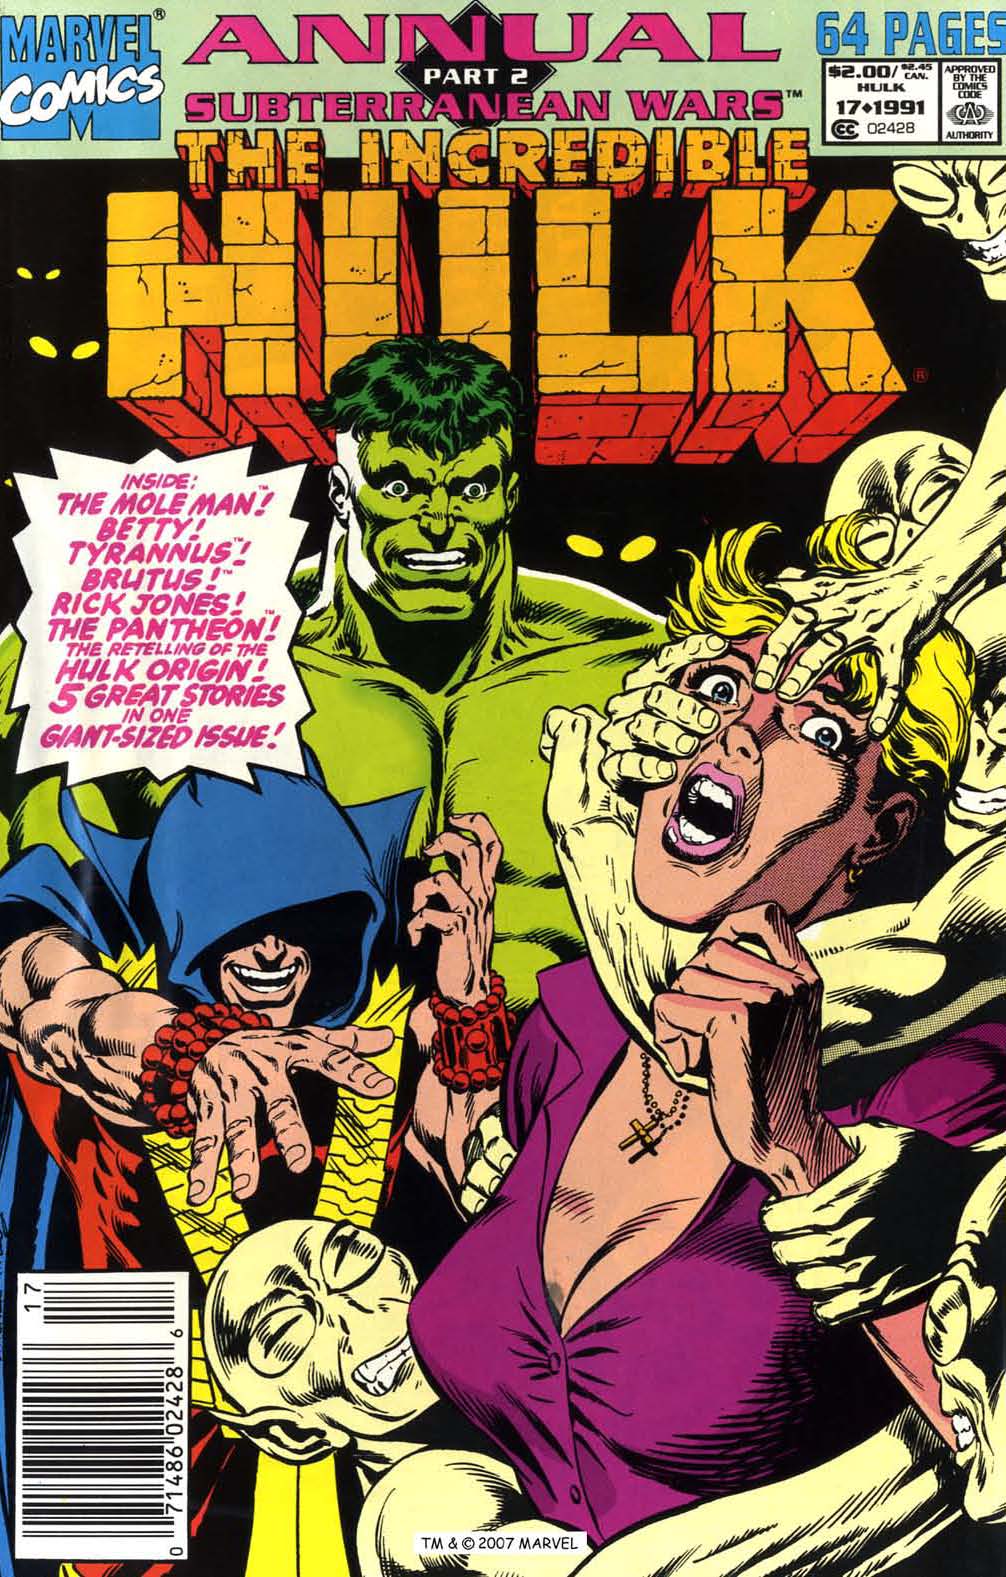 The Incredible Hulk (1968) Annual 1991 Page 1